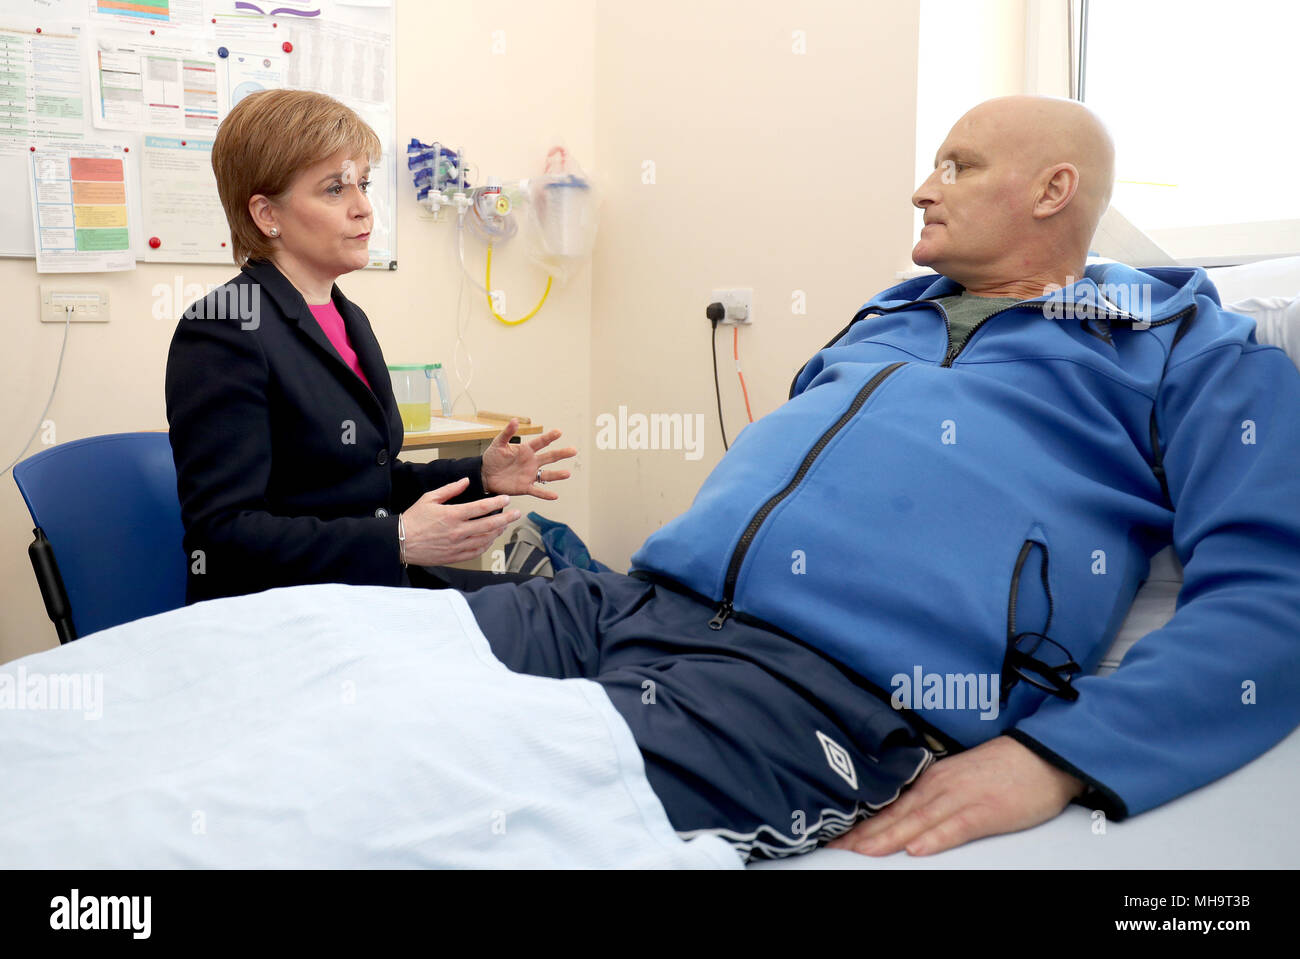 Embargoed to 0001 Tuesday May 01 First Minister Nicola Sturgeon meets patient Thomas Crawford during a visit to the Edinburgh Royal Infirmary, as she marks the minimum unit pricing for alcohol coming into force and meet patients with chronic liver problems and specialist clinicians. Stock Photo